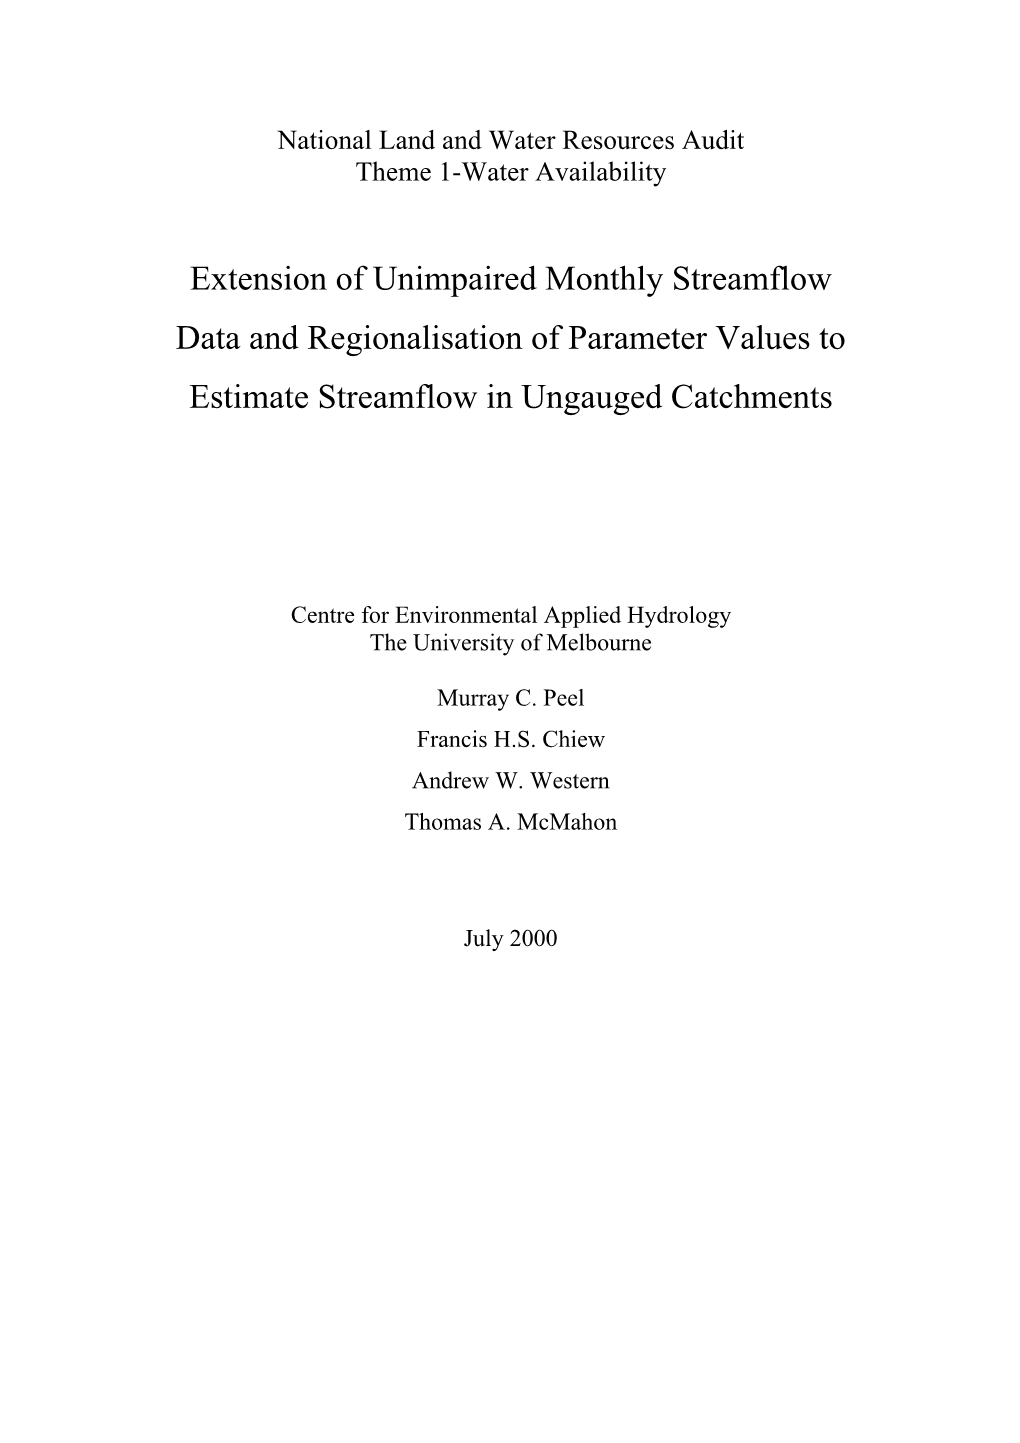 Extension of Unimpaired Monthly Streamflow Data and Regionalisation of Parameter Values to Estimate Streamflow in Ungauged Catchments